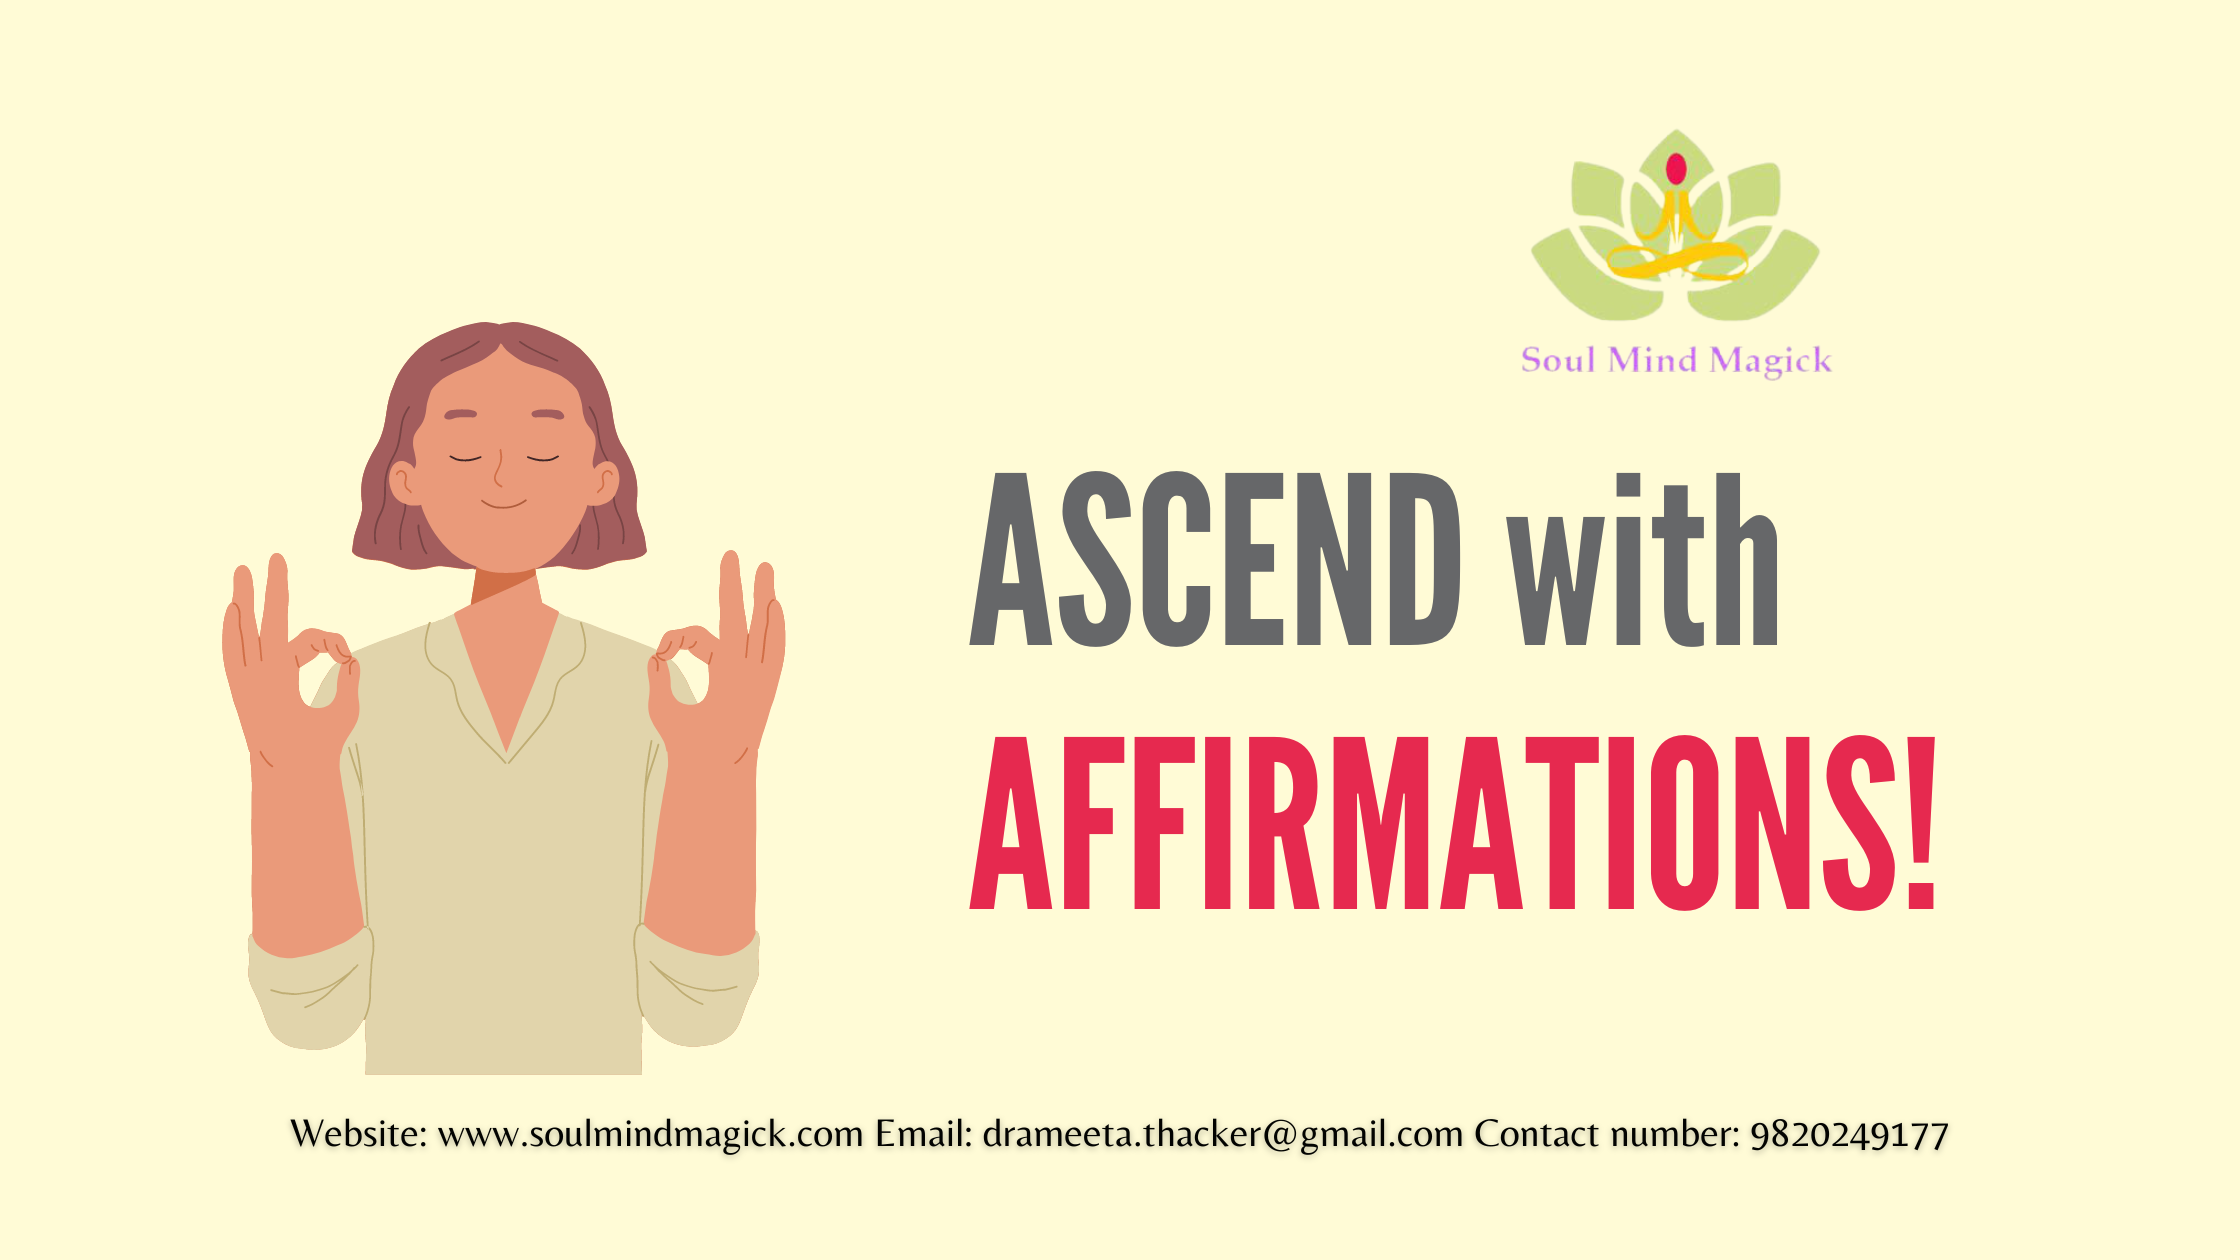 ASCENDING with Affirmations!